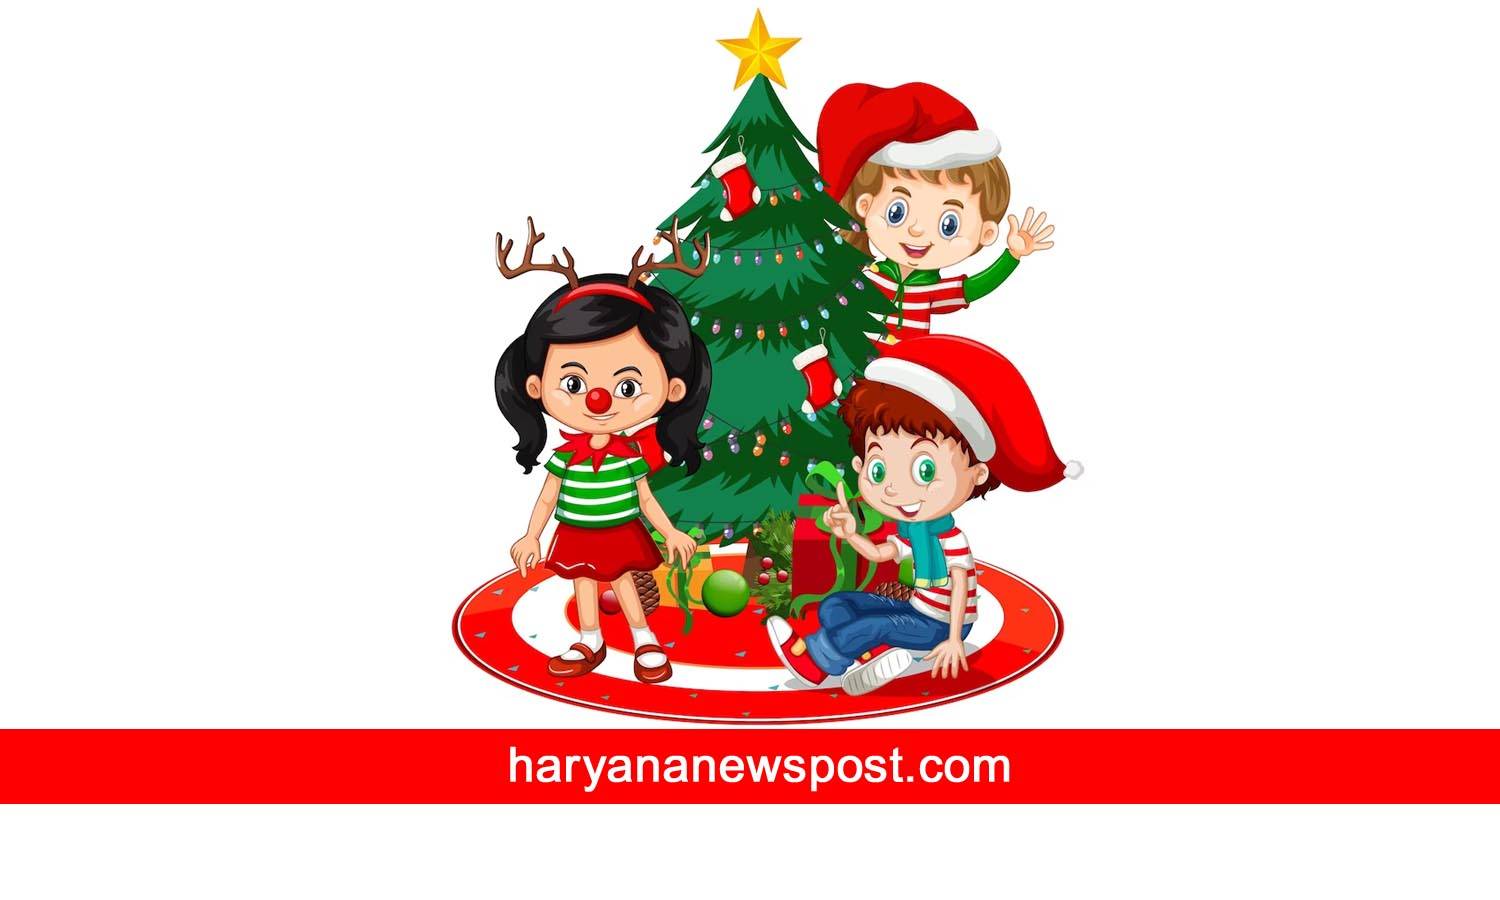 Kids Christmas holiday messages images